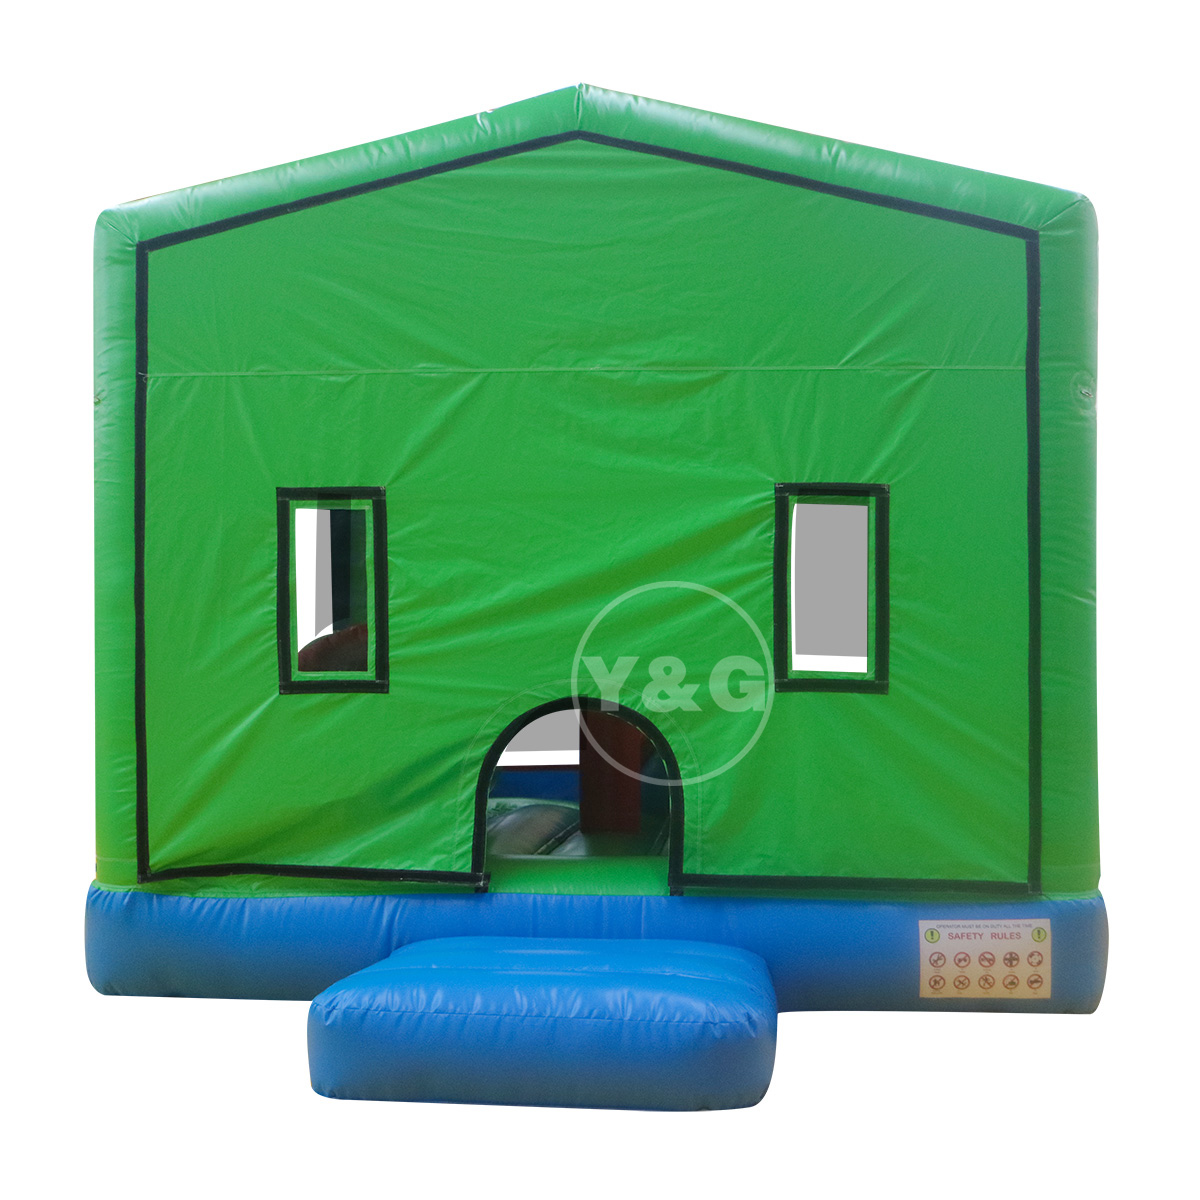 Commercial Simple Inflatable Bounce HouseYG-103